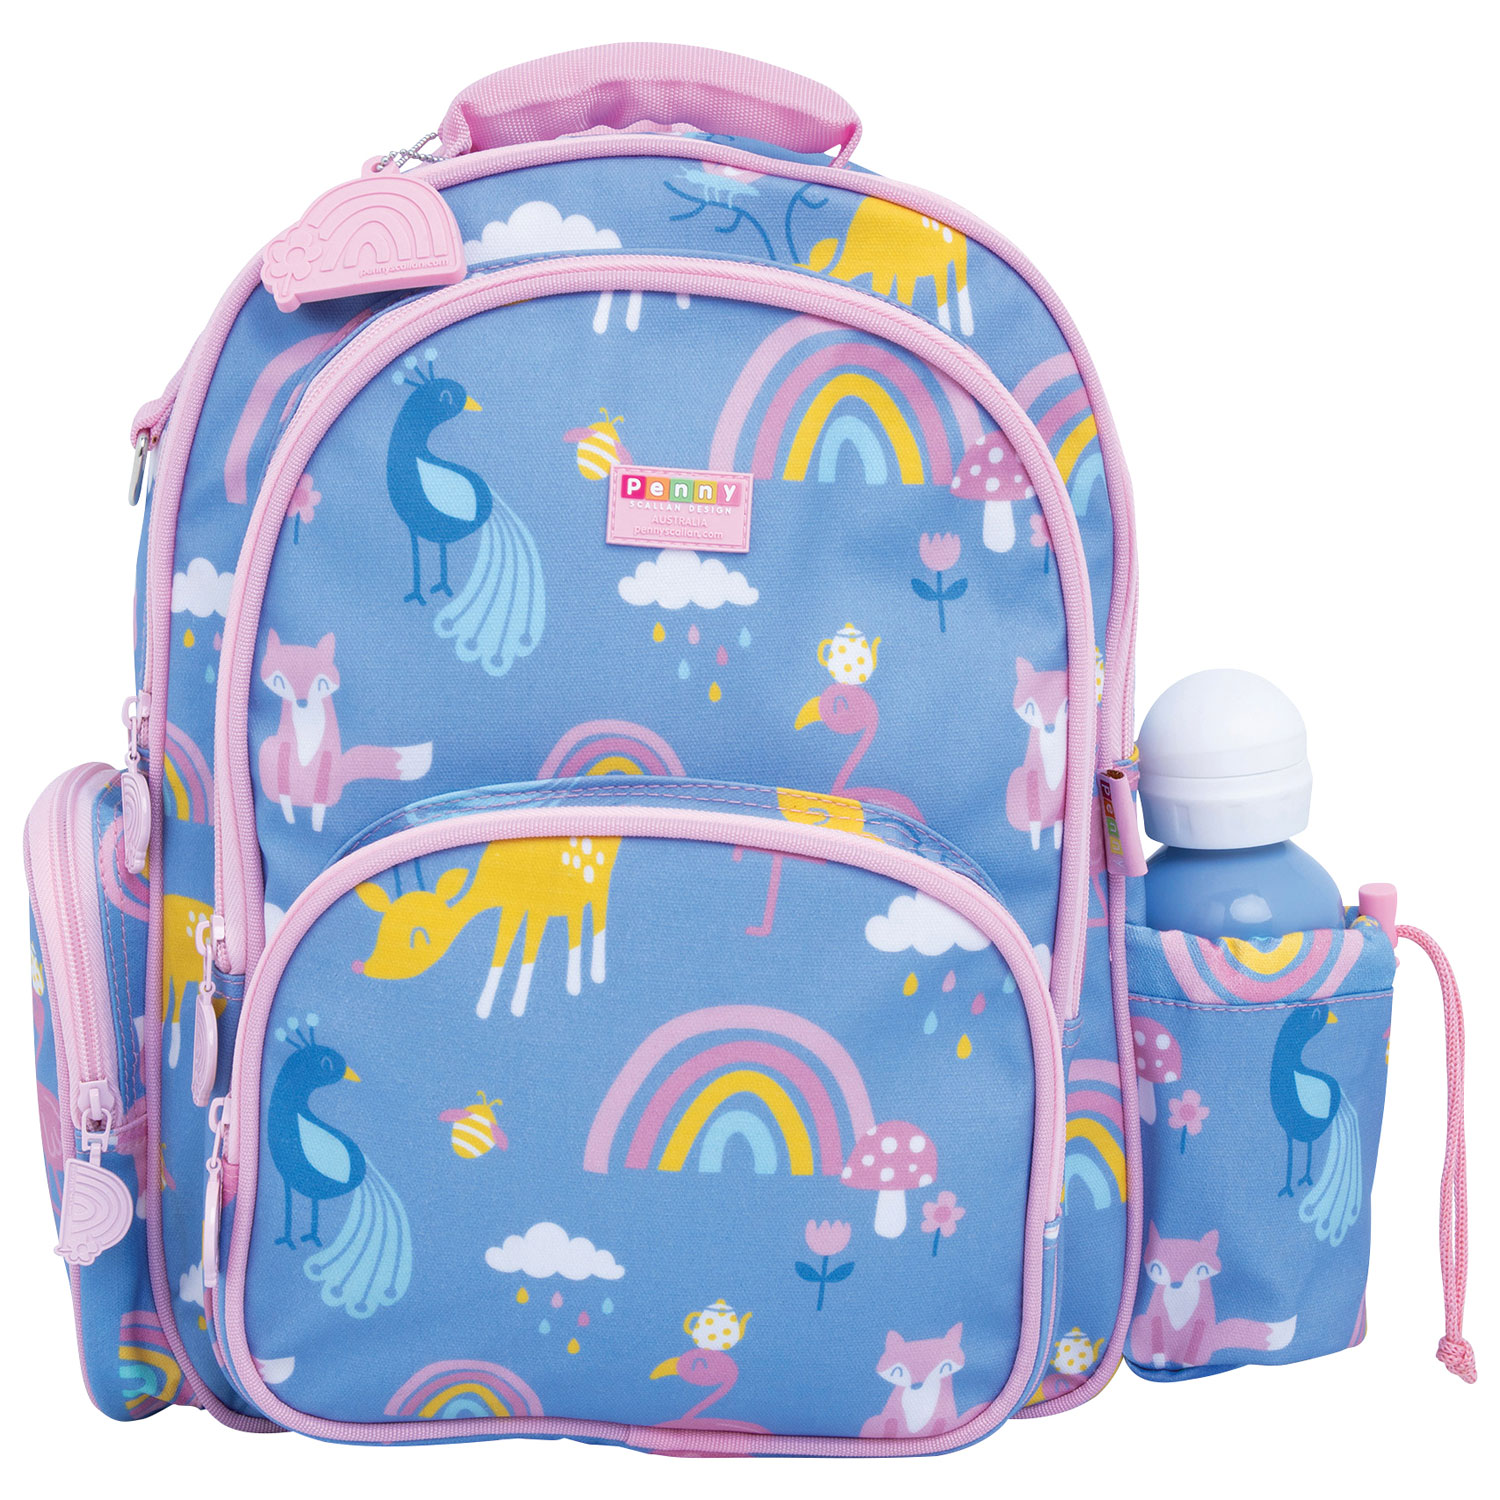 Penny Scallan Large Kids Backpack - Rainbow Days | Best Buy Canada